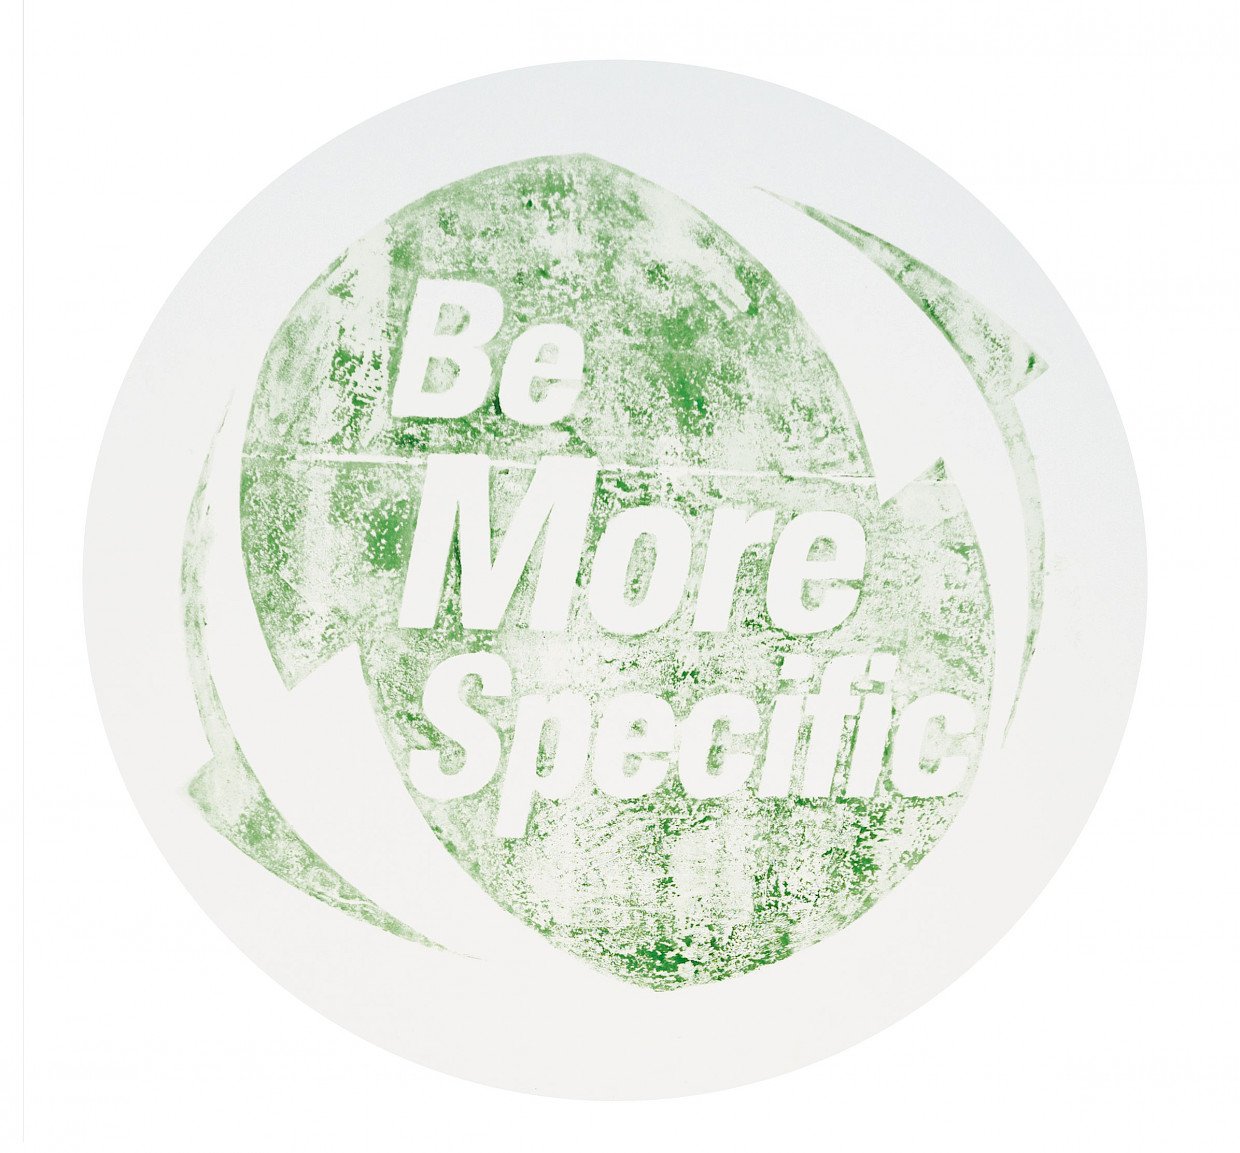 Image from Untitled (Be more specific) by Job Koelewijn